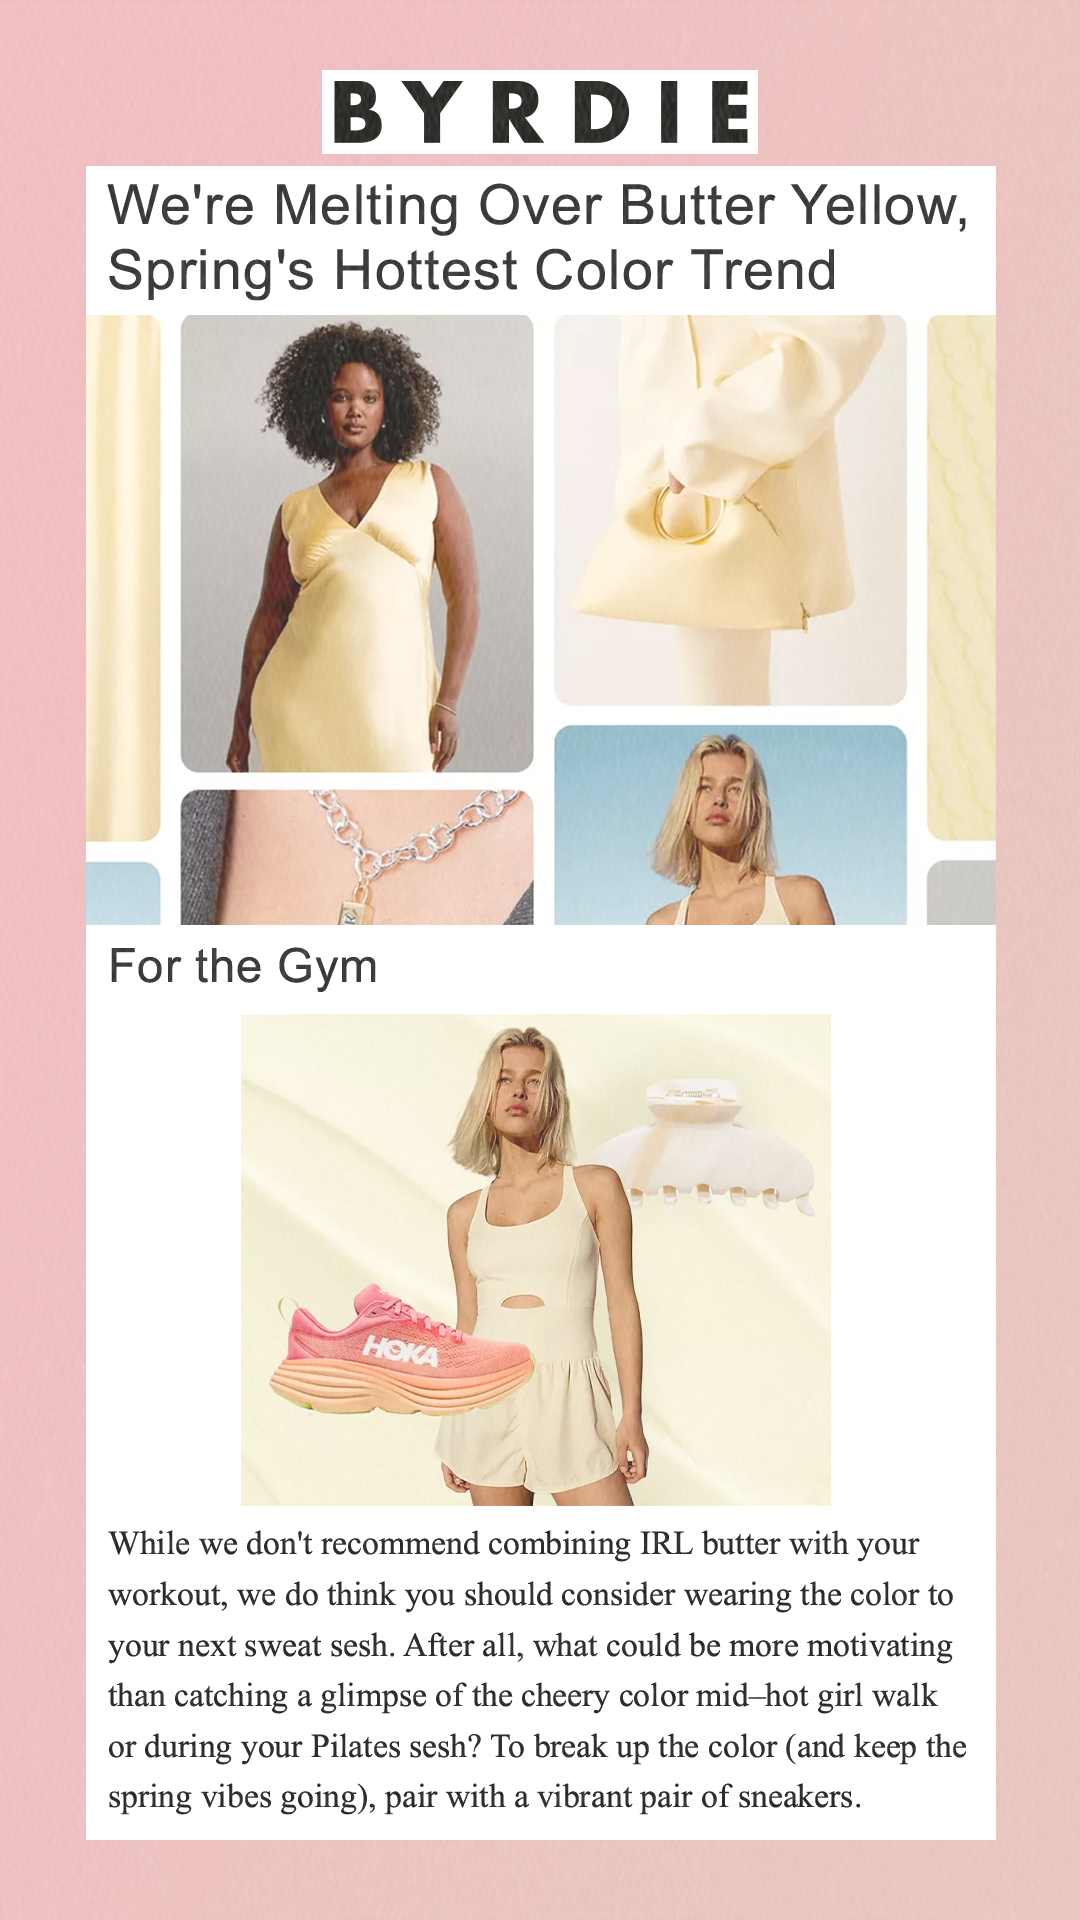 We're Melting Over Butter Yellow, Spring's Hottest Color Trend   For the Gym     Hoka / Free People / Emi Jay / Byrdie While we don't recommend combining IRL butter with your workout, we do think you should consider wearing the color to your next sweat sesh. After all, what could be more motivating than catching a glimpse of the cheery color mid–hot girl walk or during your Pilates sesh? To break up the color (and keep the spring vibes going), pair with a vibrant pair of sneakers.